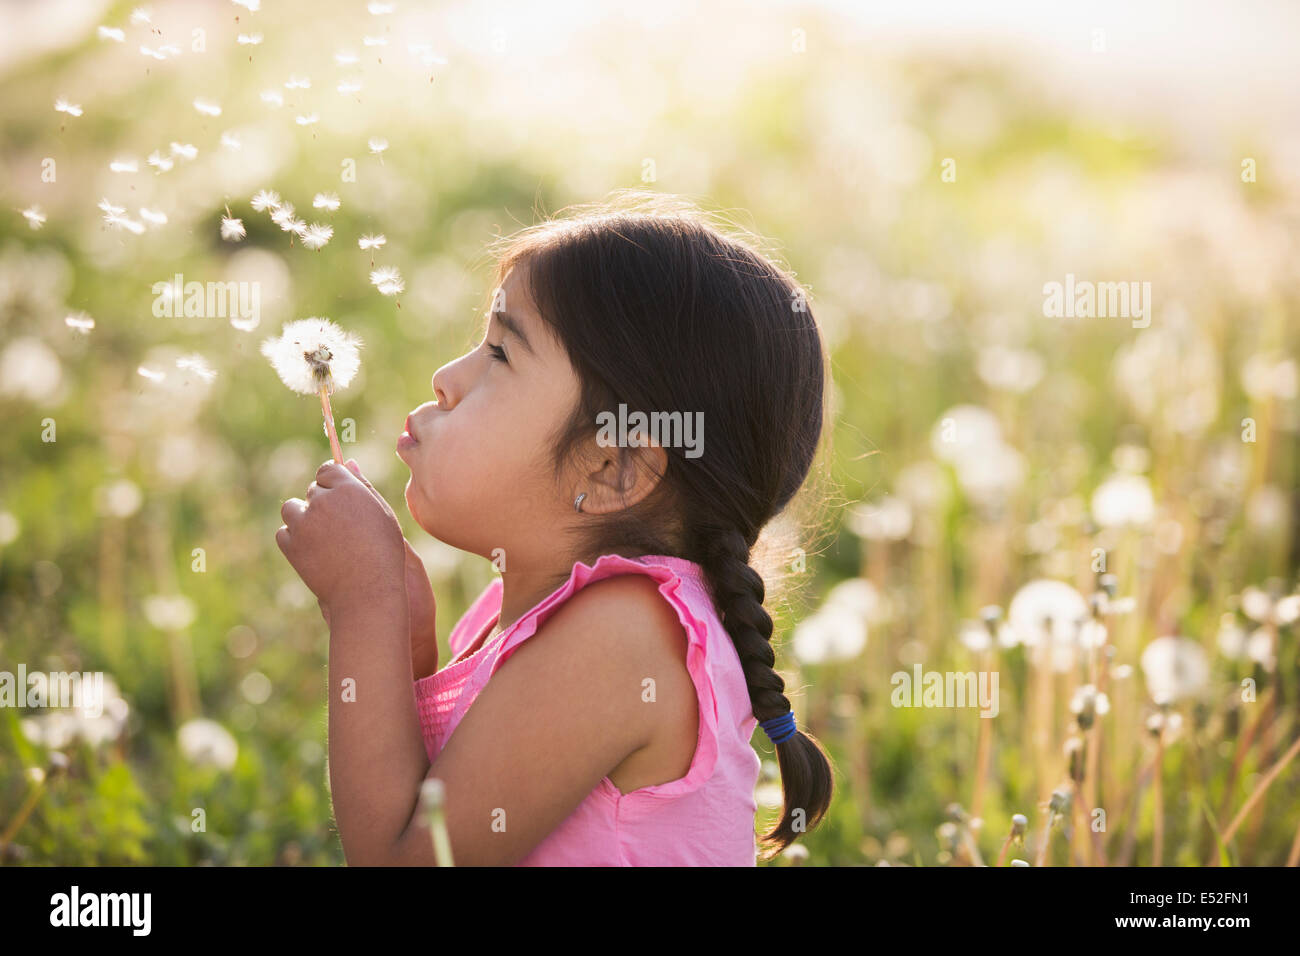 A young child in a field of flowers, blowing the fluffy seeds off a dandelion seedhead clock. Stock Photo